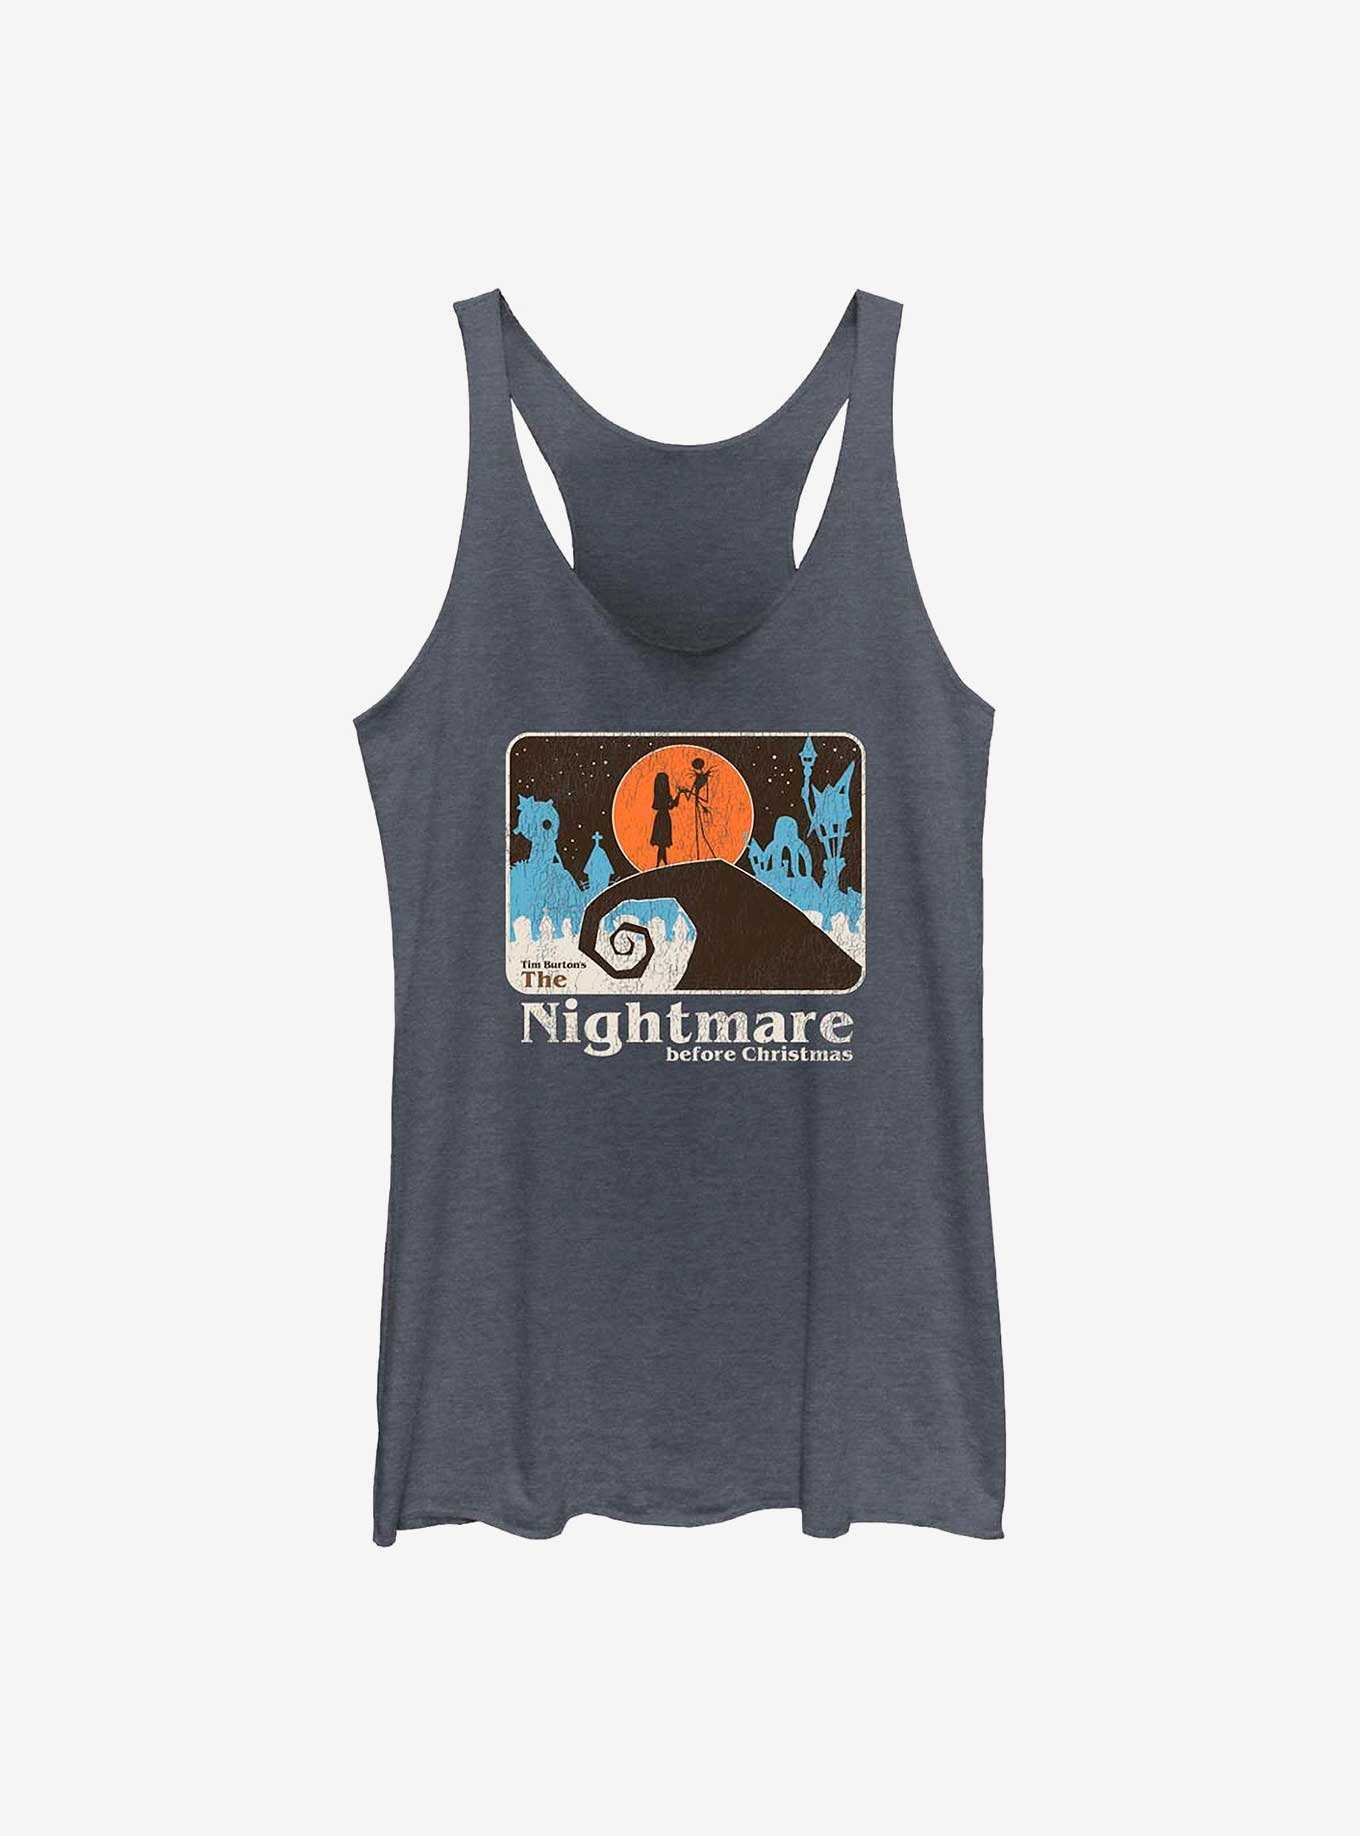 Disney The Nightmare Before Christmas Jack and Sally Hill Girls Tank, , hi-res